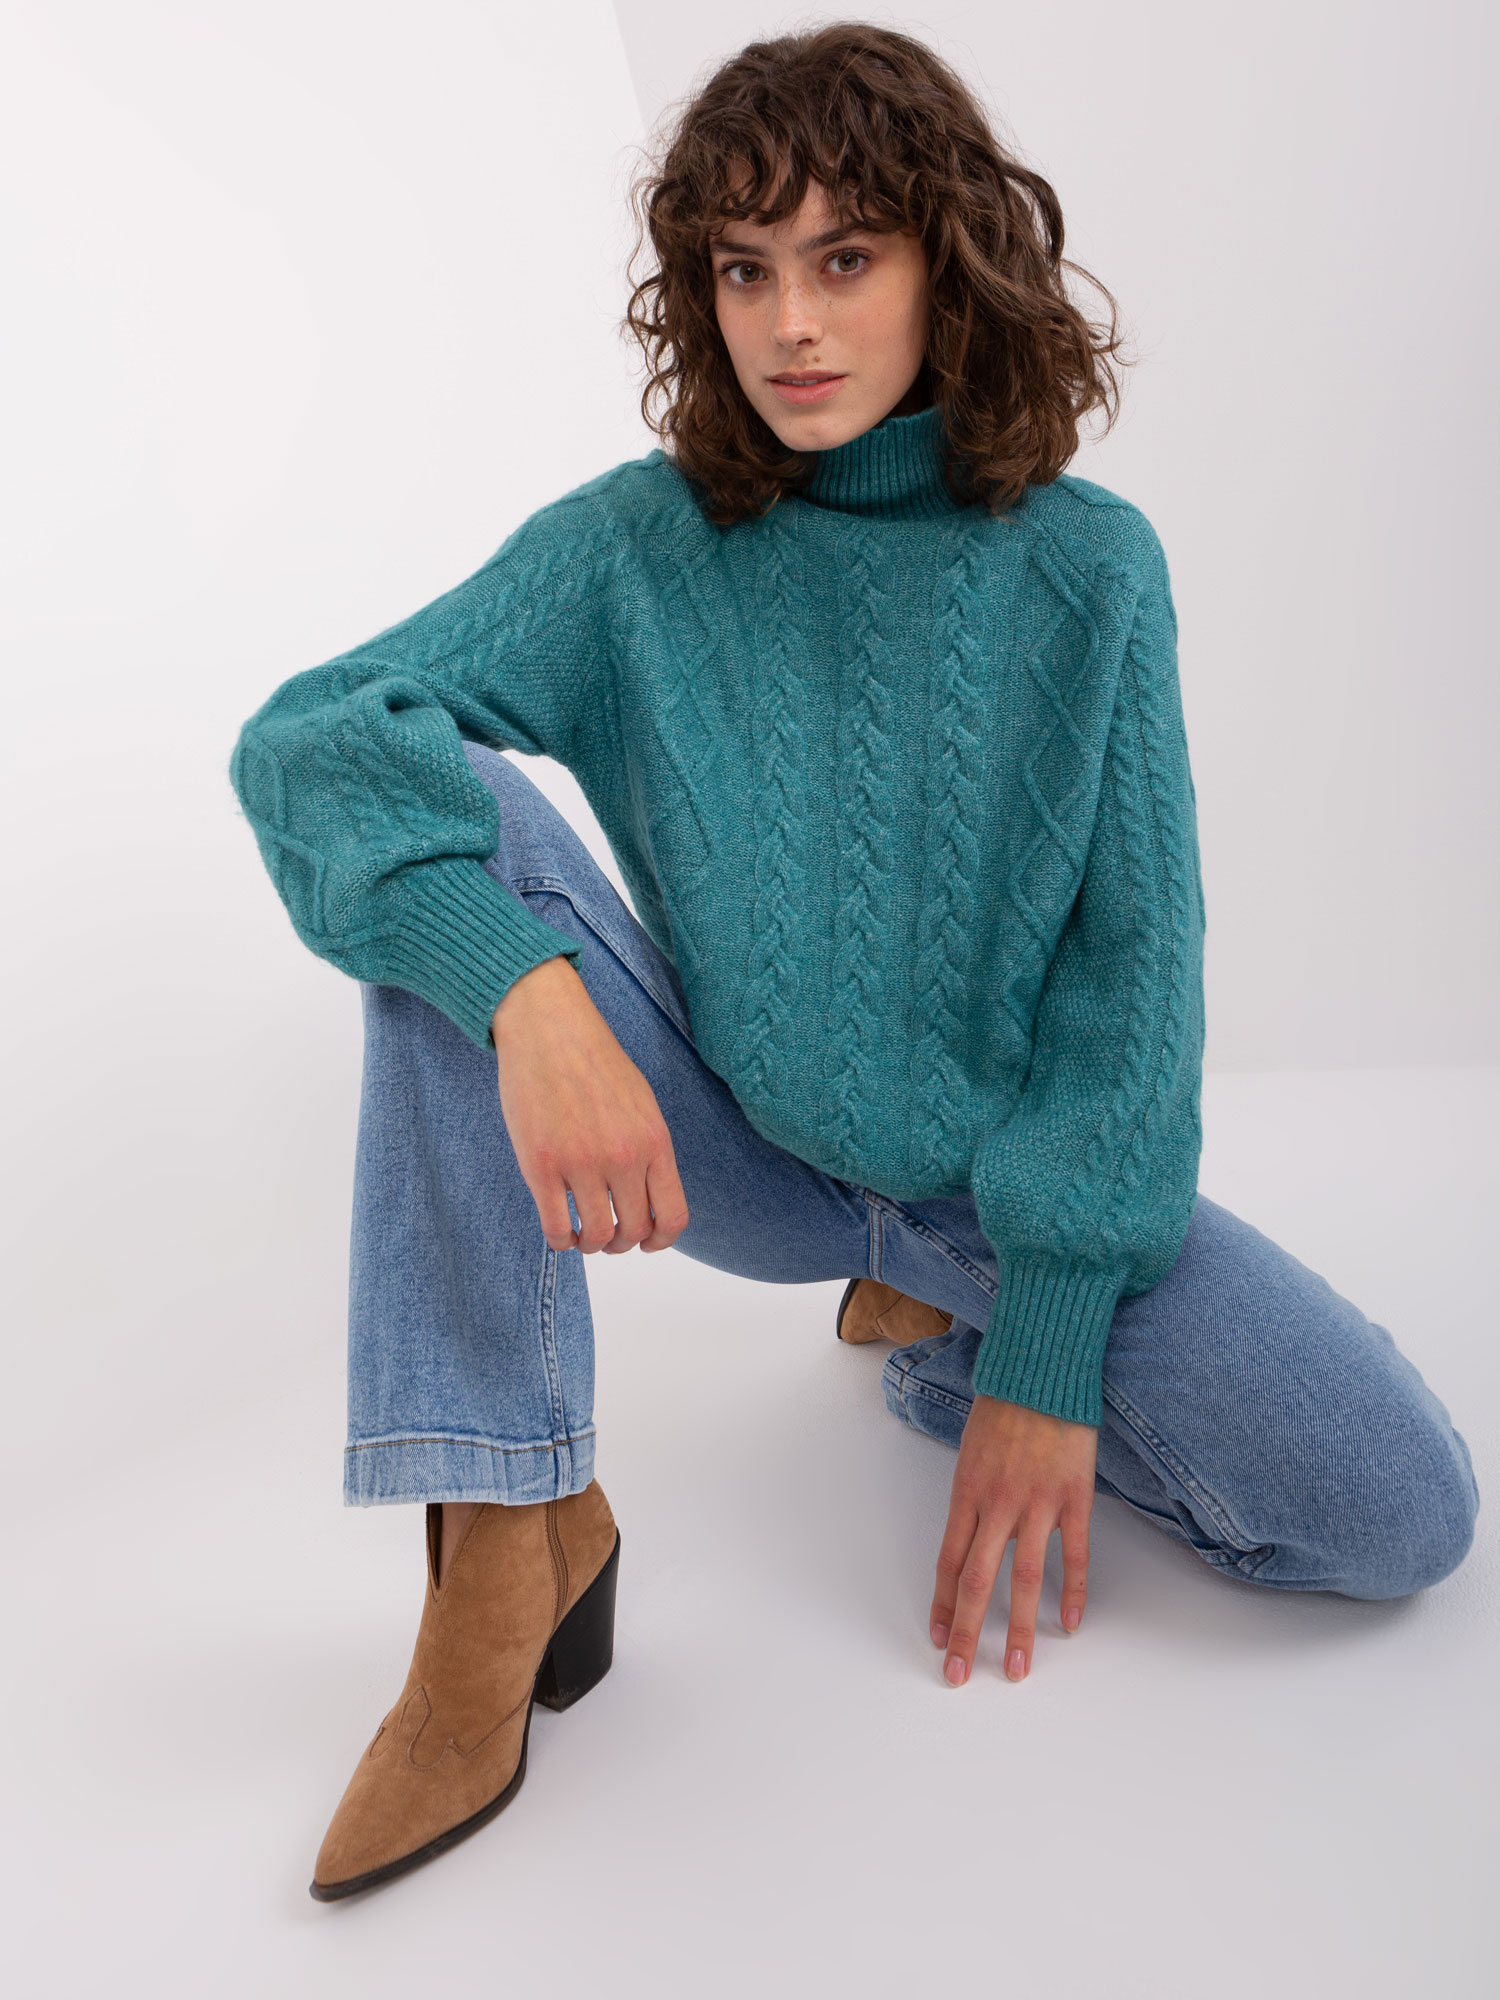 Turquoise cable knit turtleneck sweater